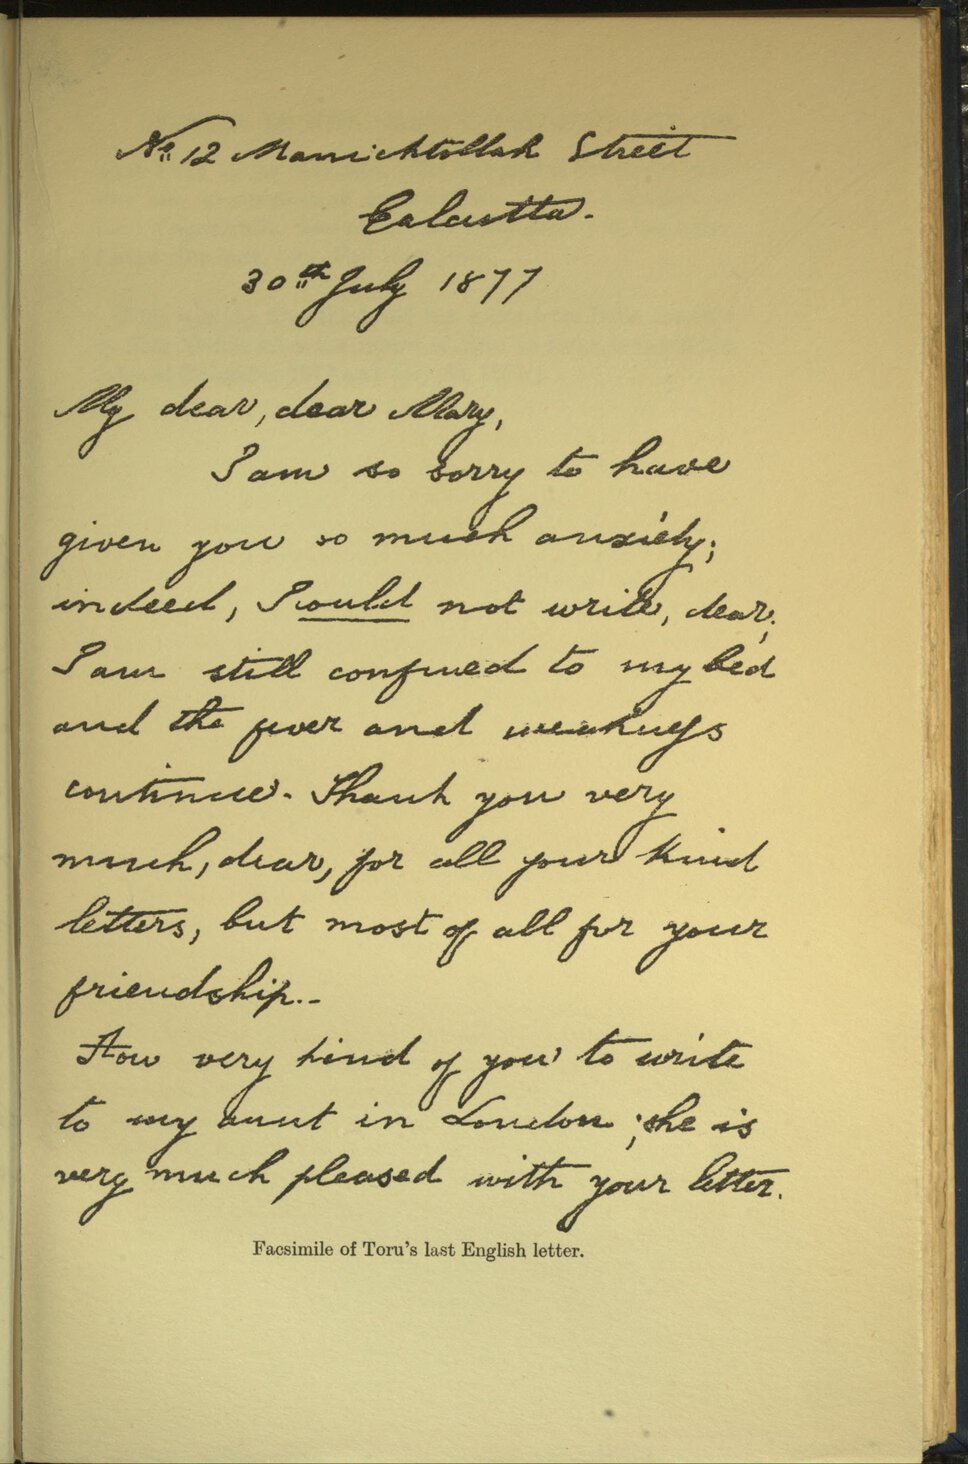 Handwritten poem titled the “Letter to Mary E.R. Martin.”